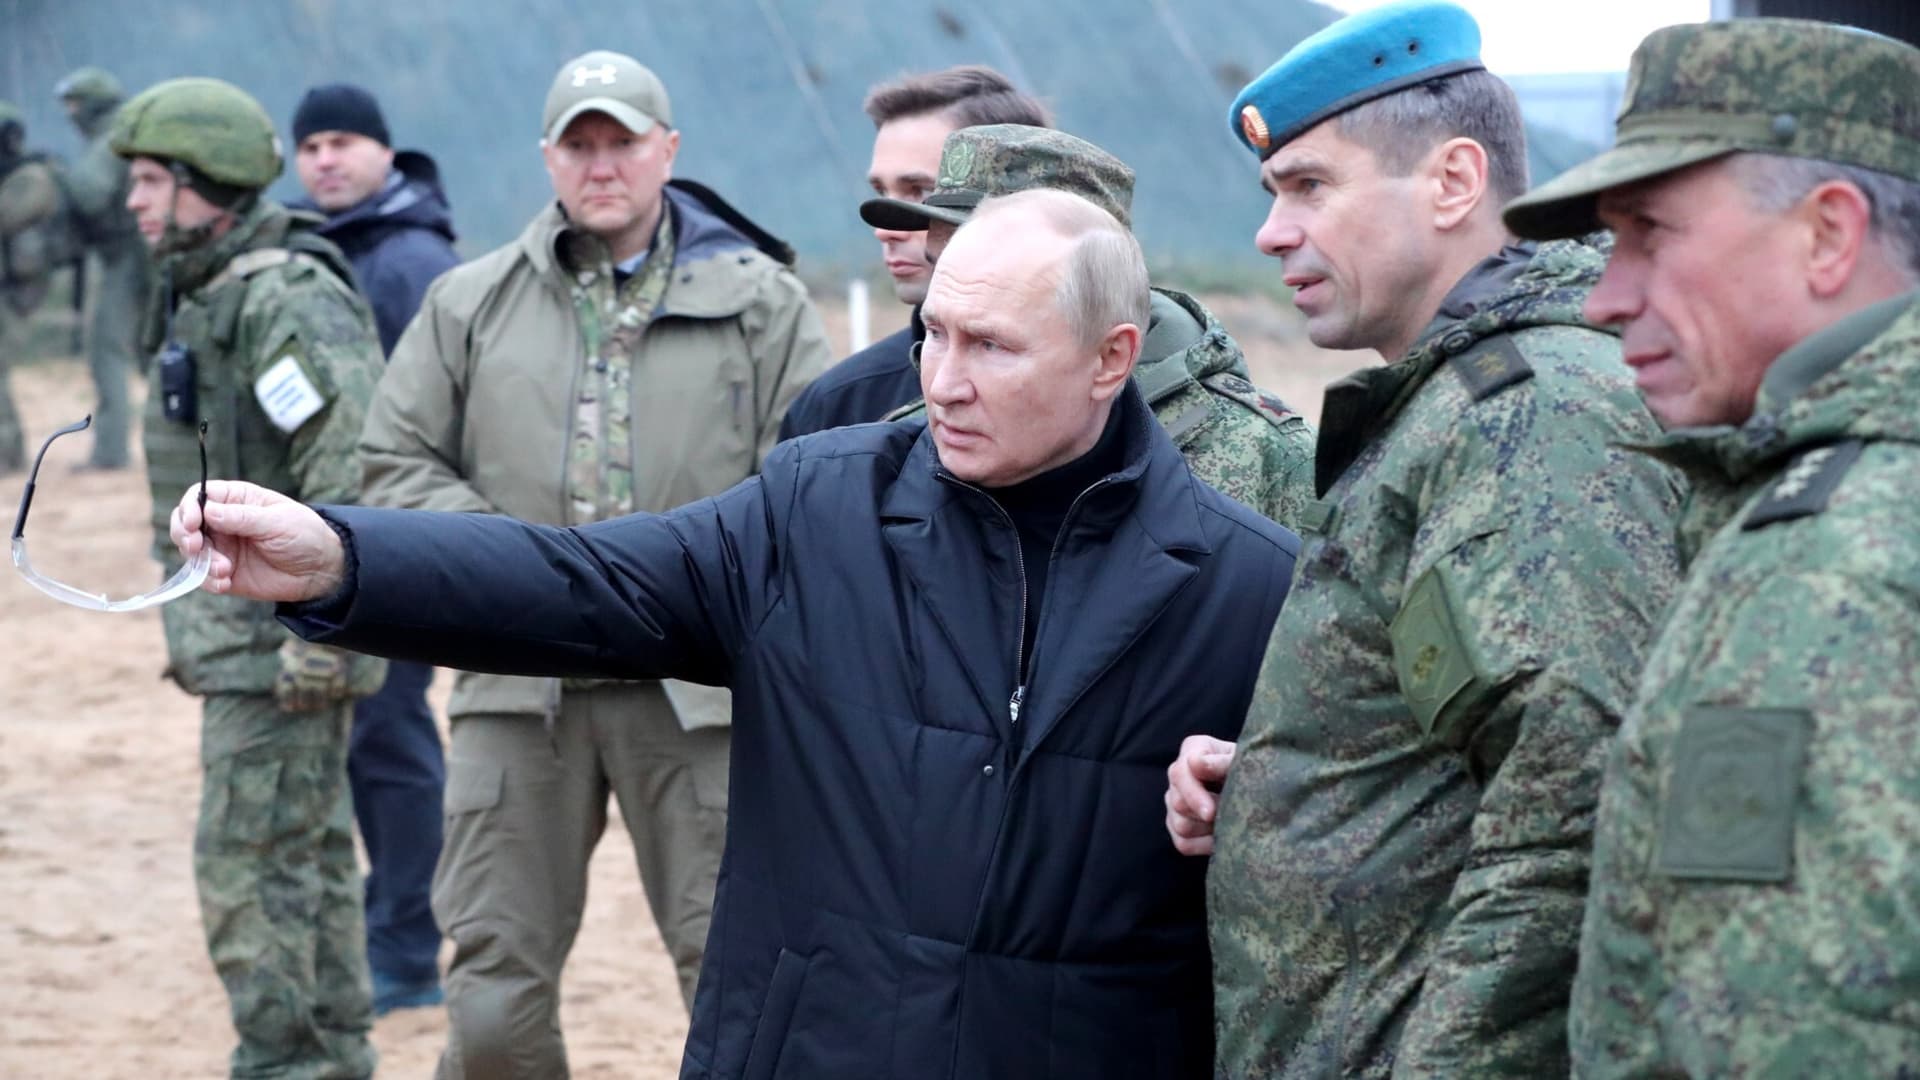 Russian President Vladimir Putin inspects a training ground in the Ryazan region of Russia for recruits who were summoned for military service under a partial mobilization, on Oct. 20, 2022.